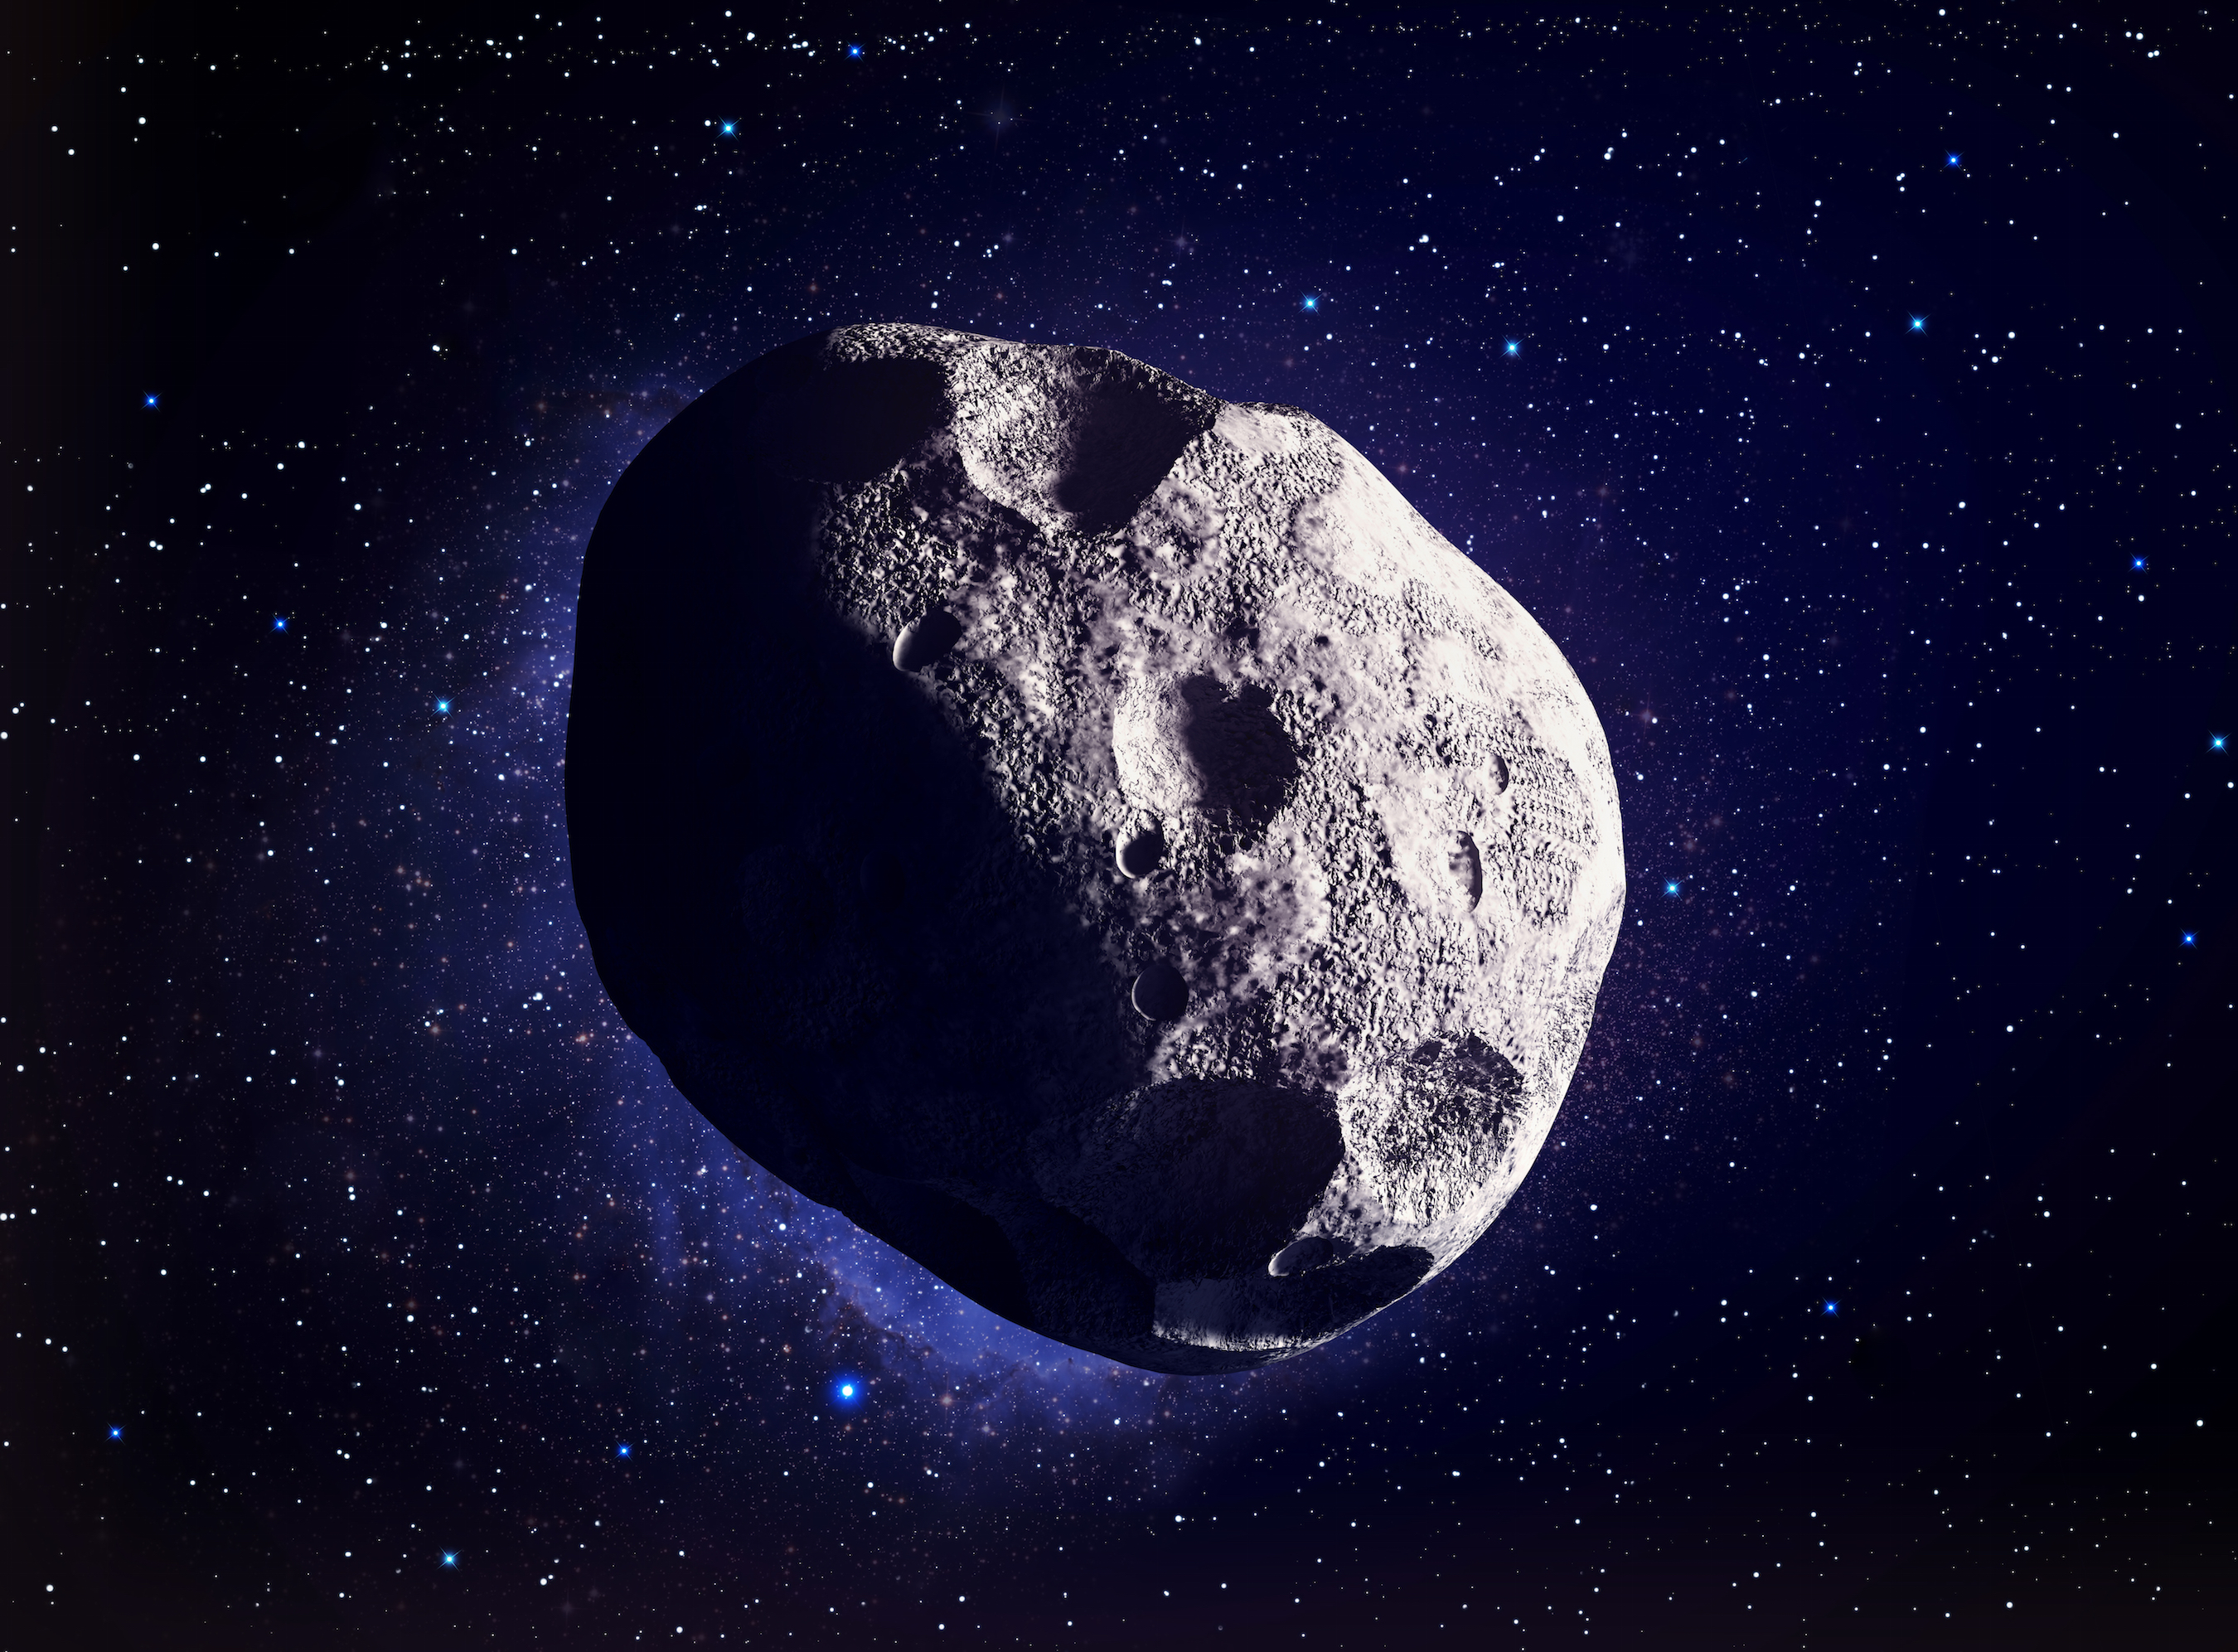 NASA Is Going To Try To Knock An Asteroid Off Course To Save Earth - InsideHook